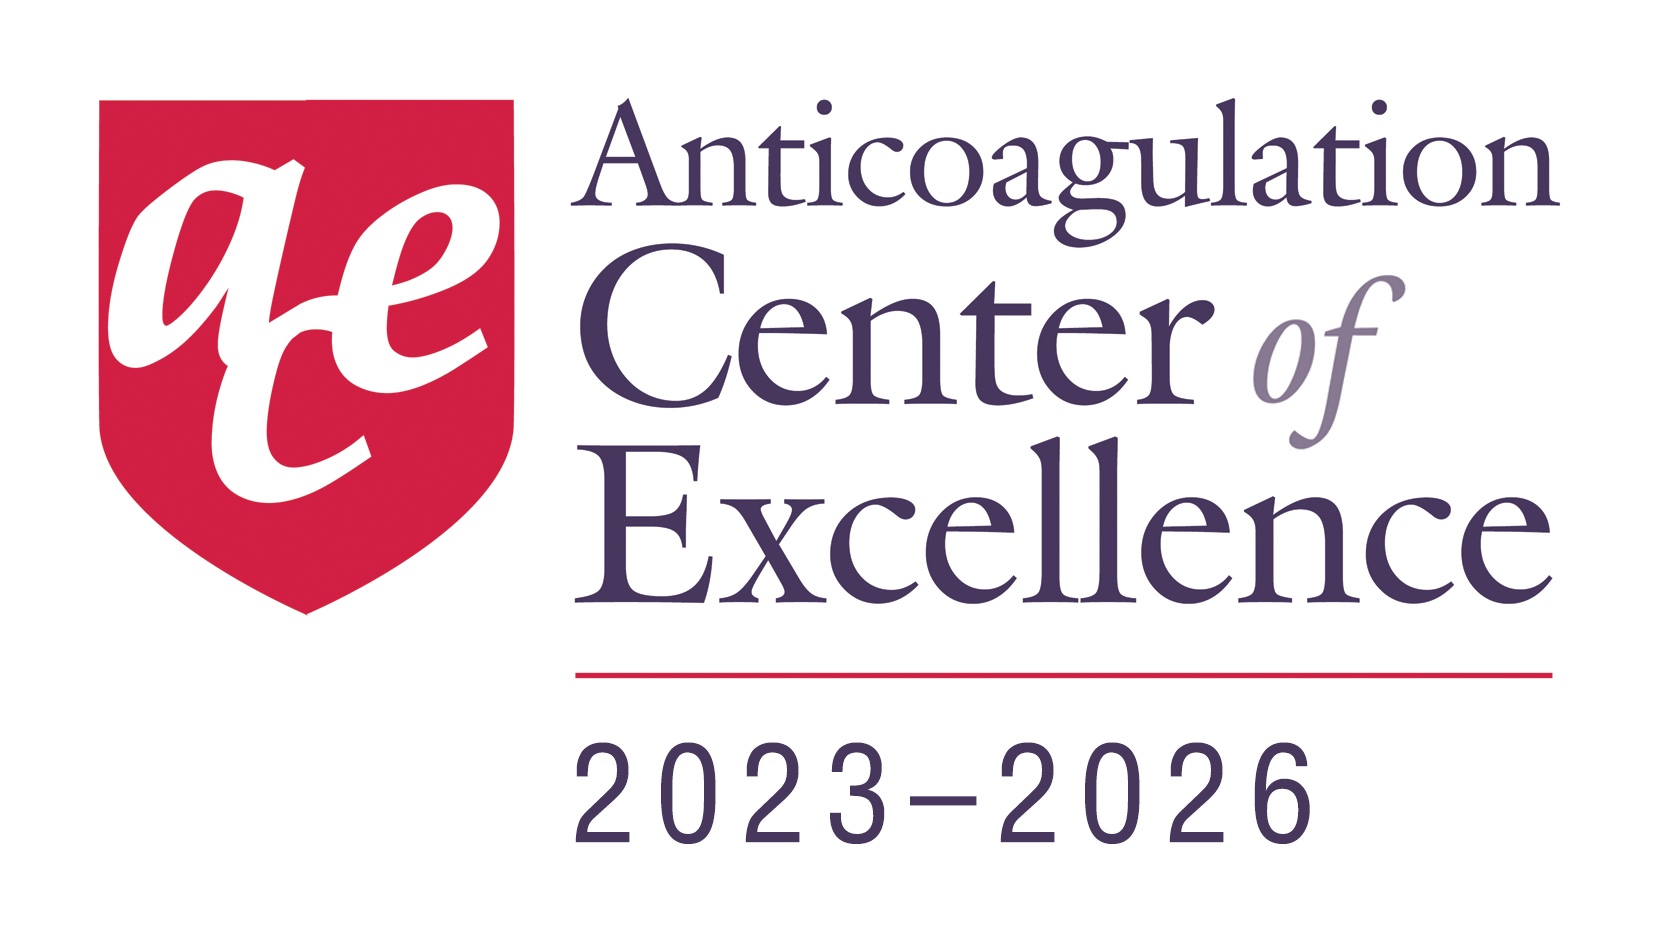 Anticoagulation Center of Excellence 2023-2026 designation showing white letters of ACE in a red block of color